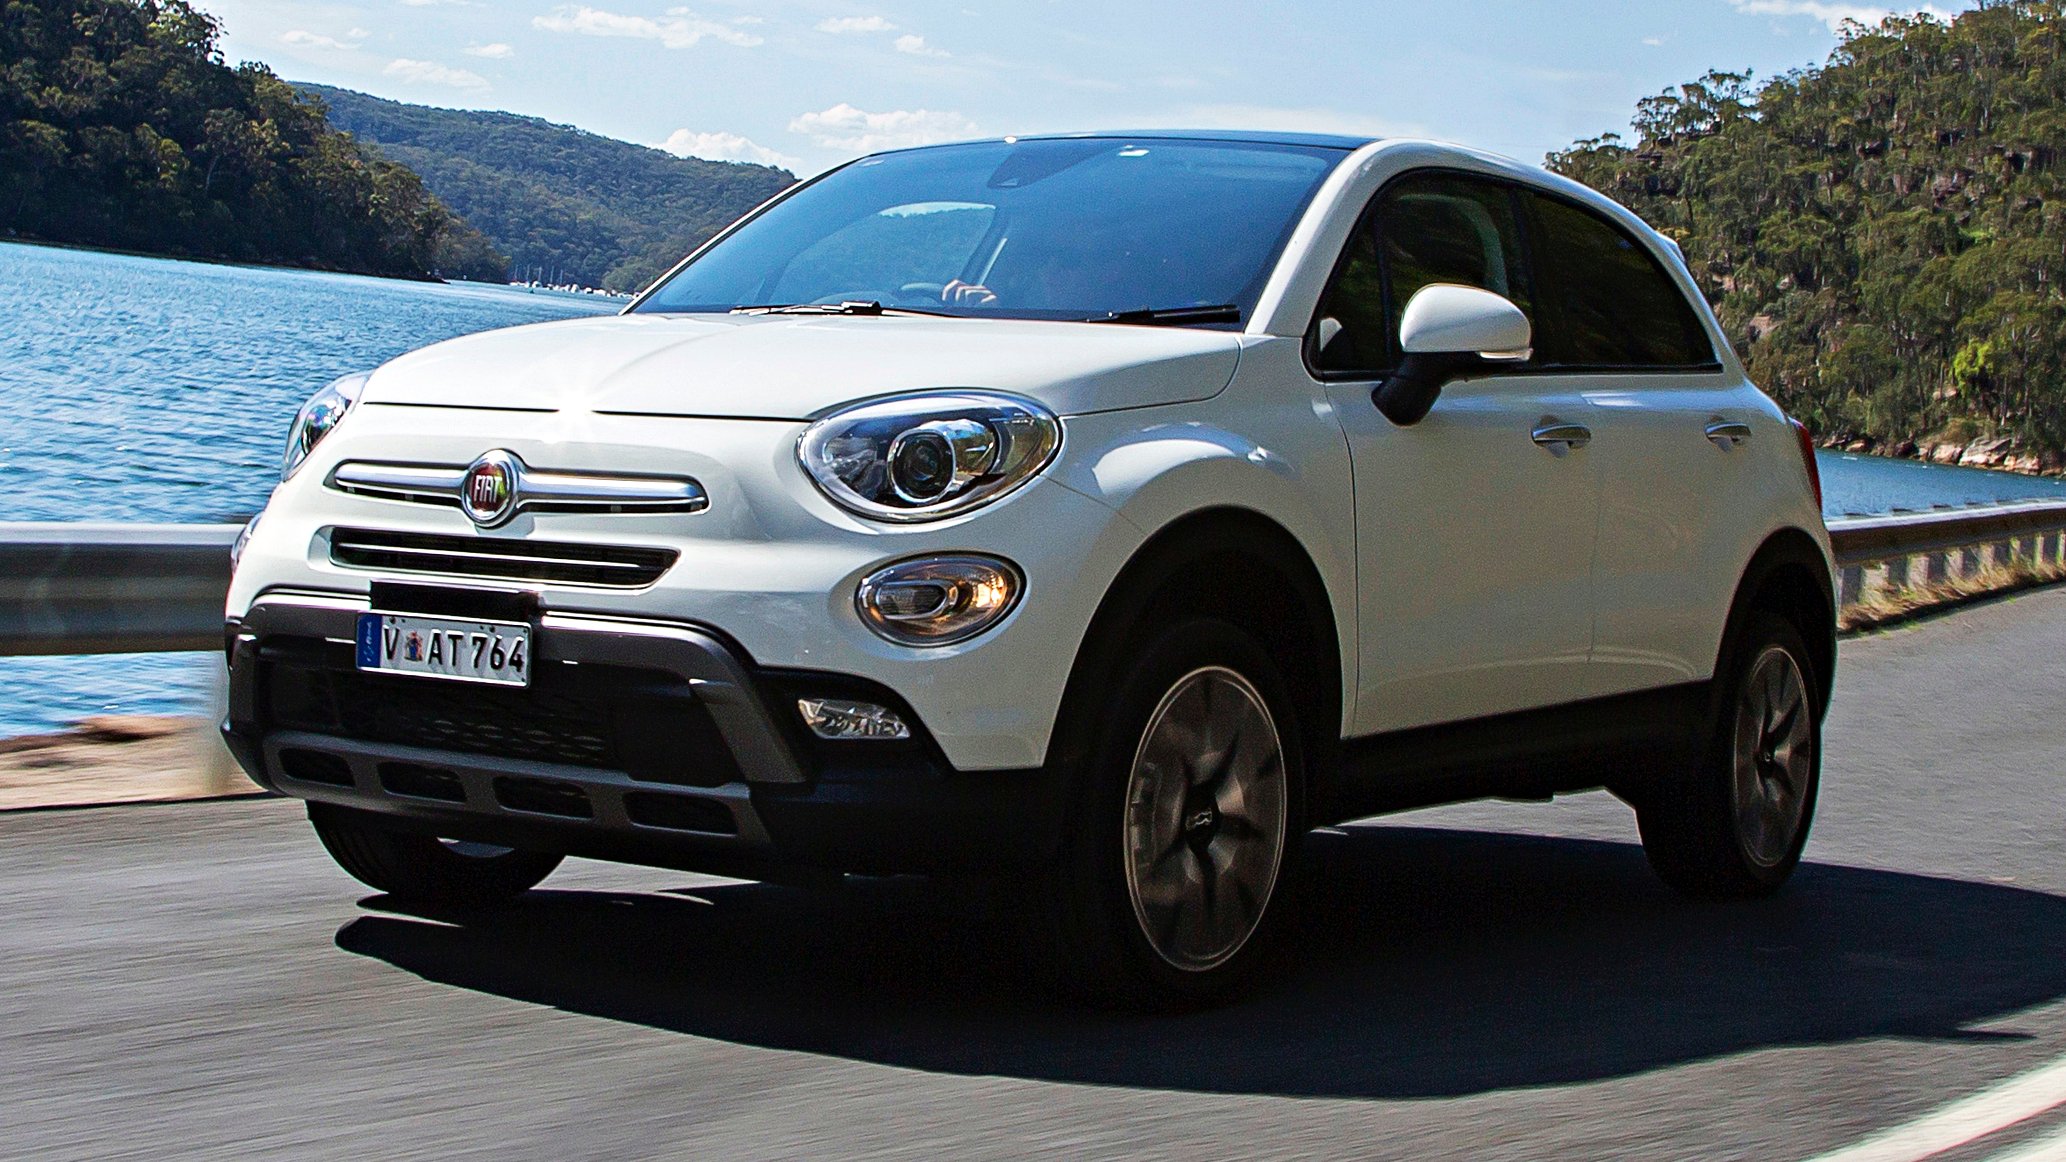 Review - 2018 Fiat 500X - Review
